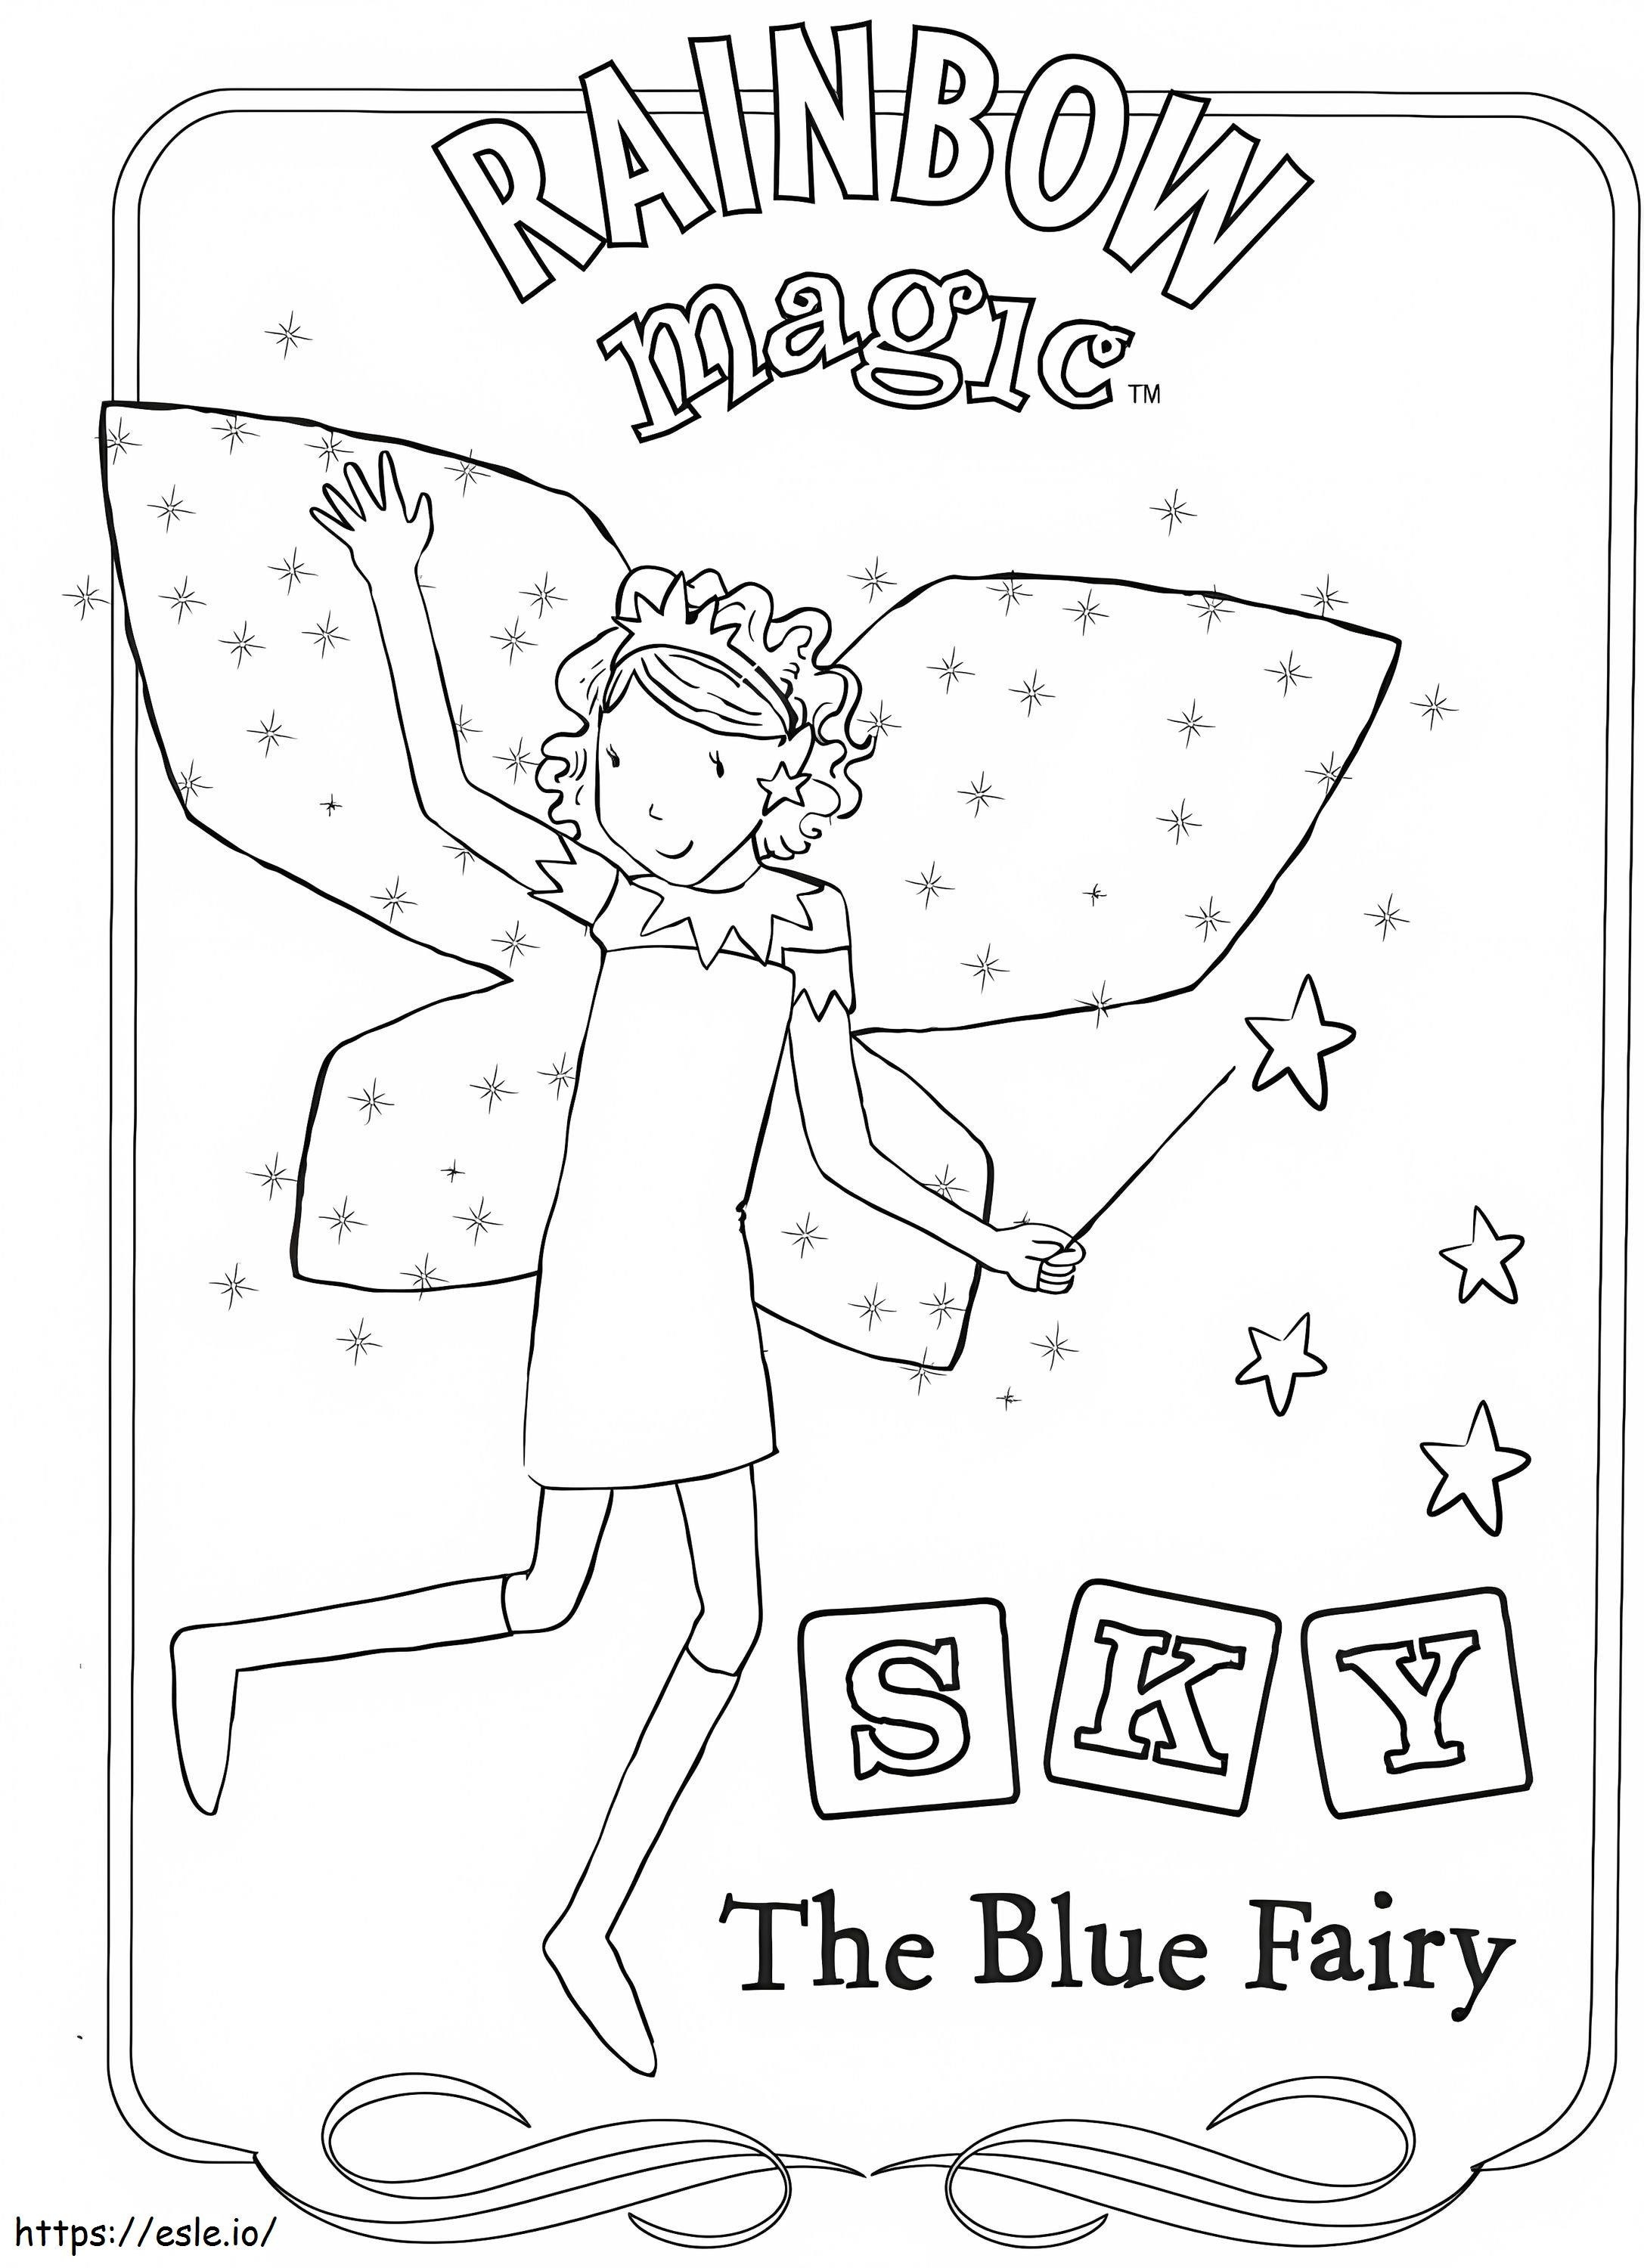 Sky The Blue Fairy coloring page